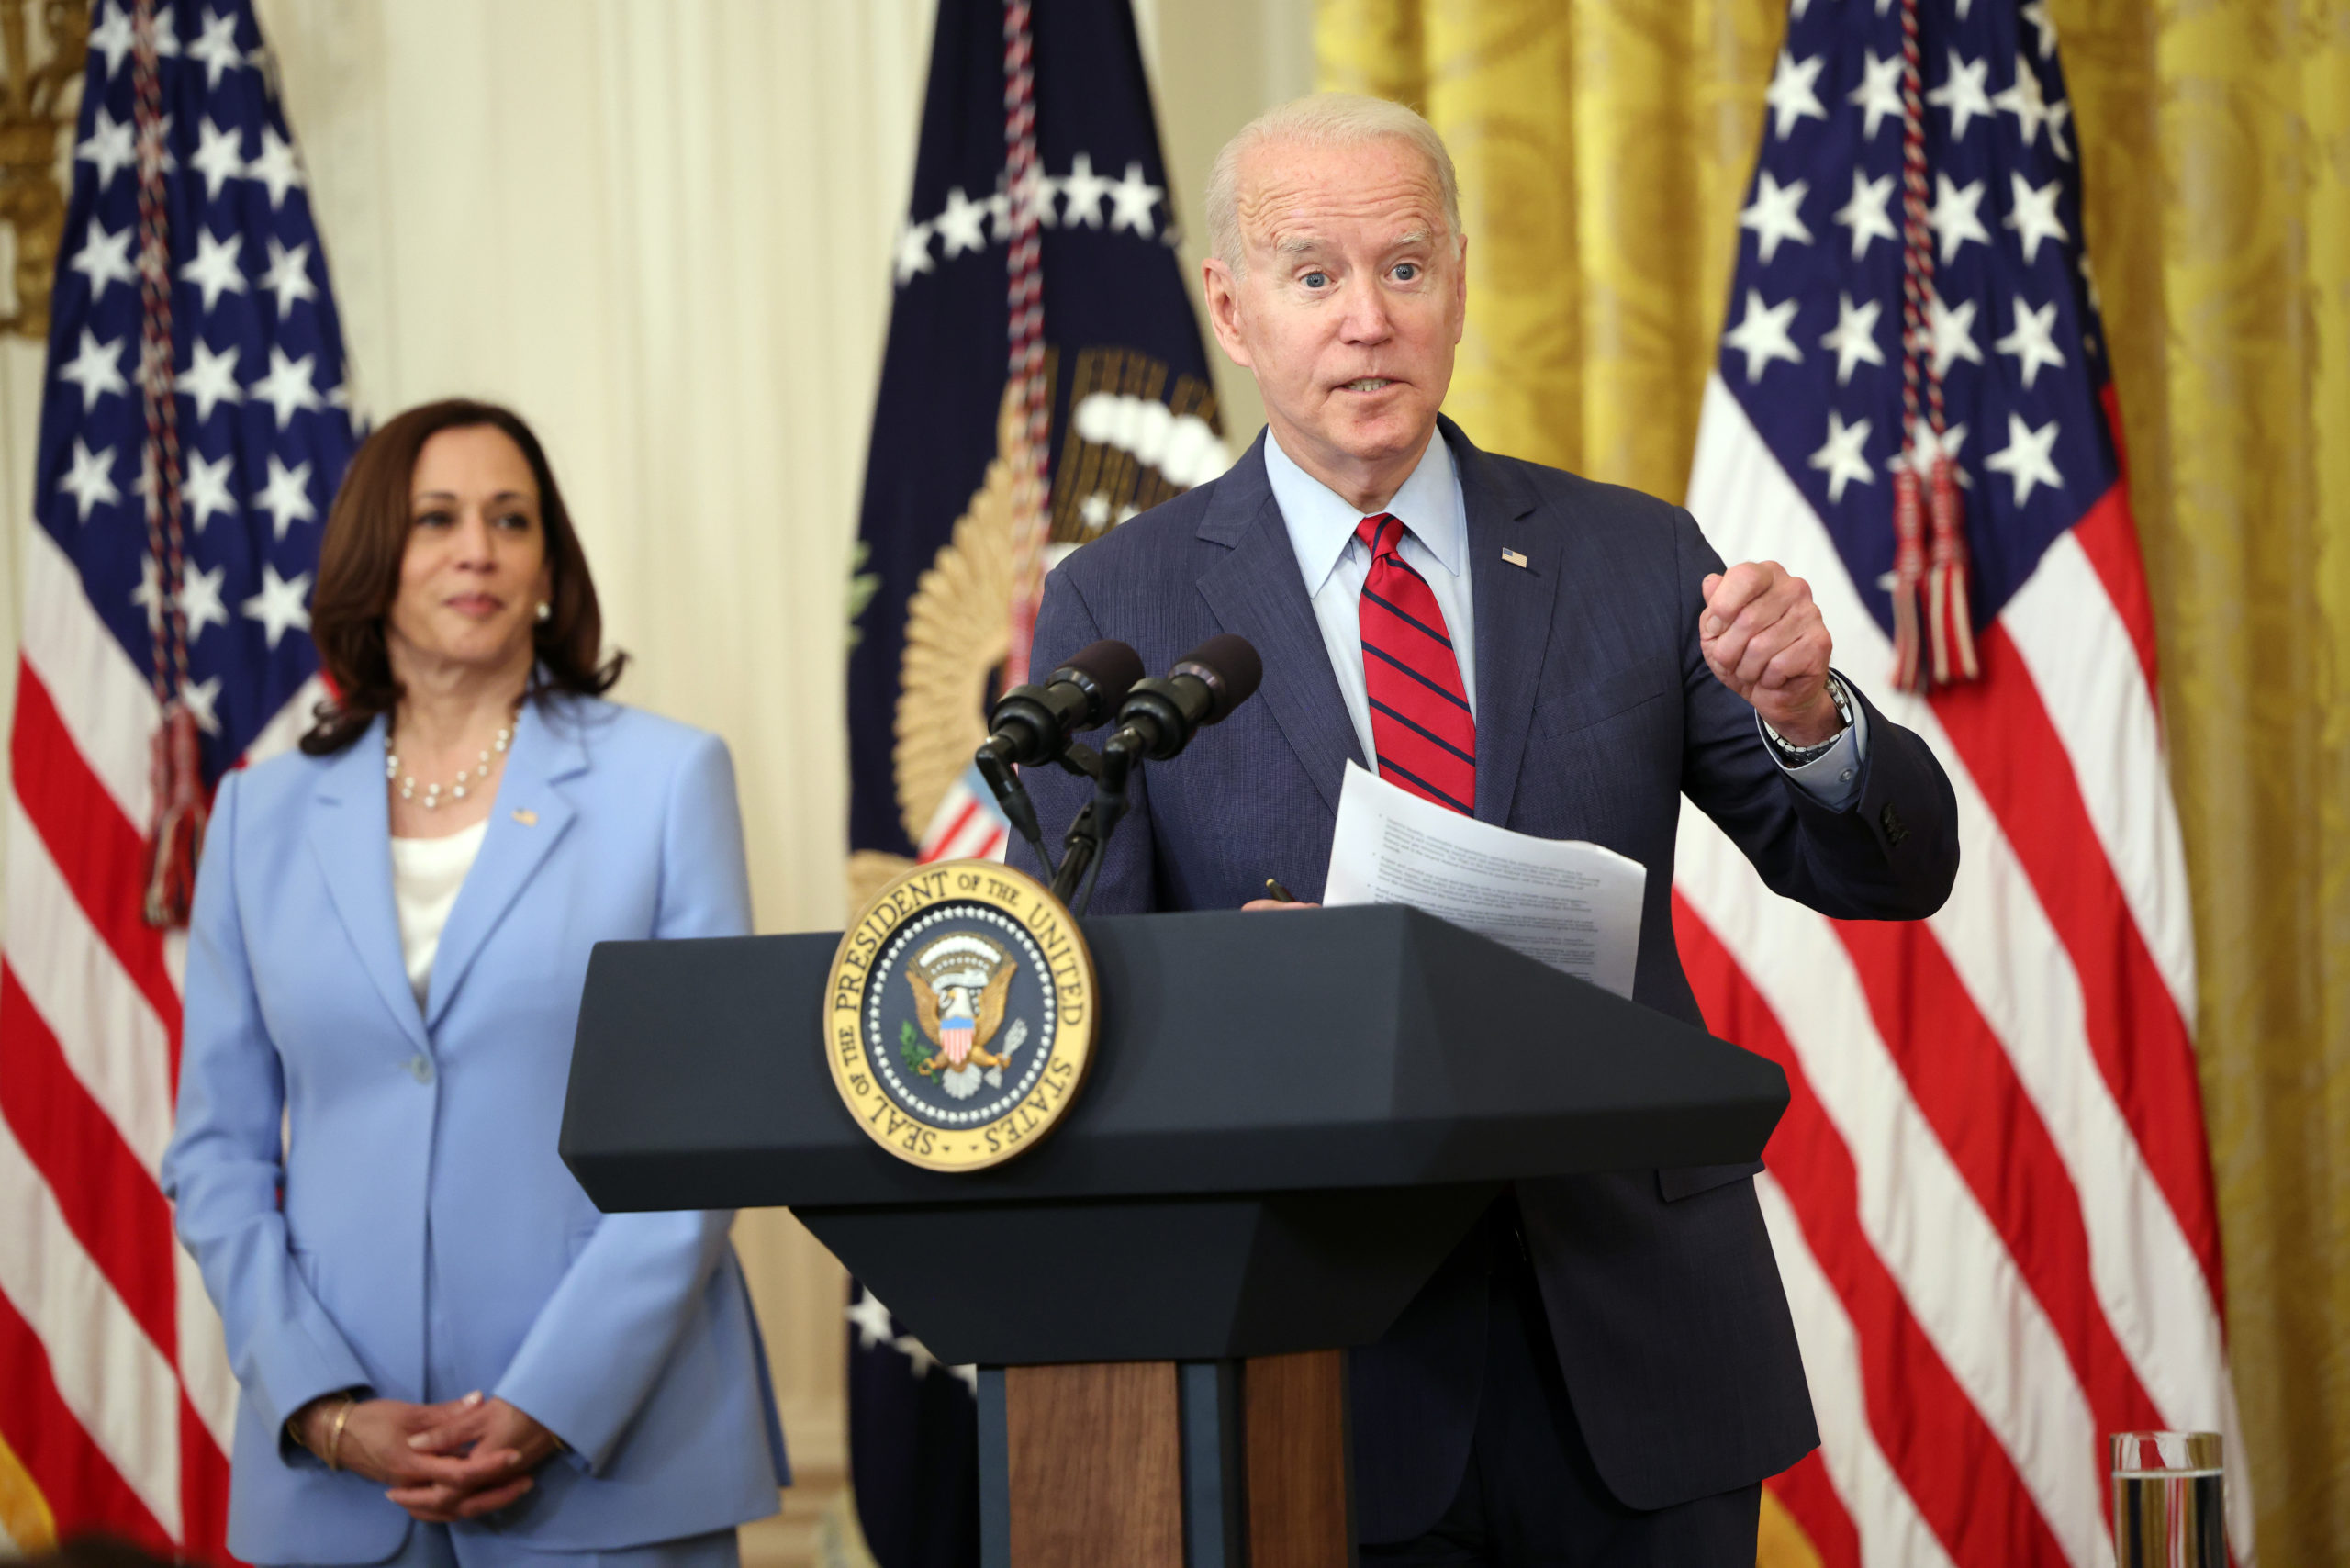 President Joe Biden said that the bipartisan infrastructure bill must go "in tandem" with Democrats reconciliation package Thursday. (Kevin Dietsch/Getty Images)